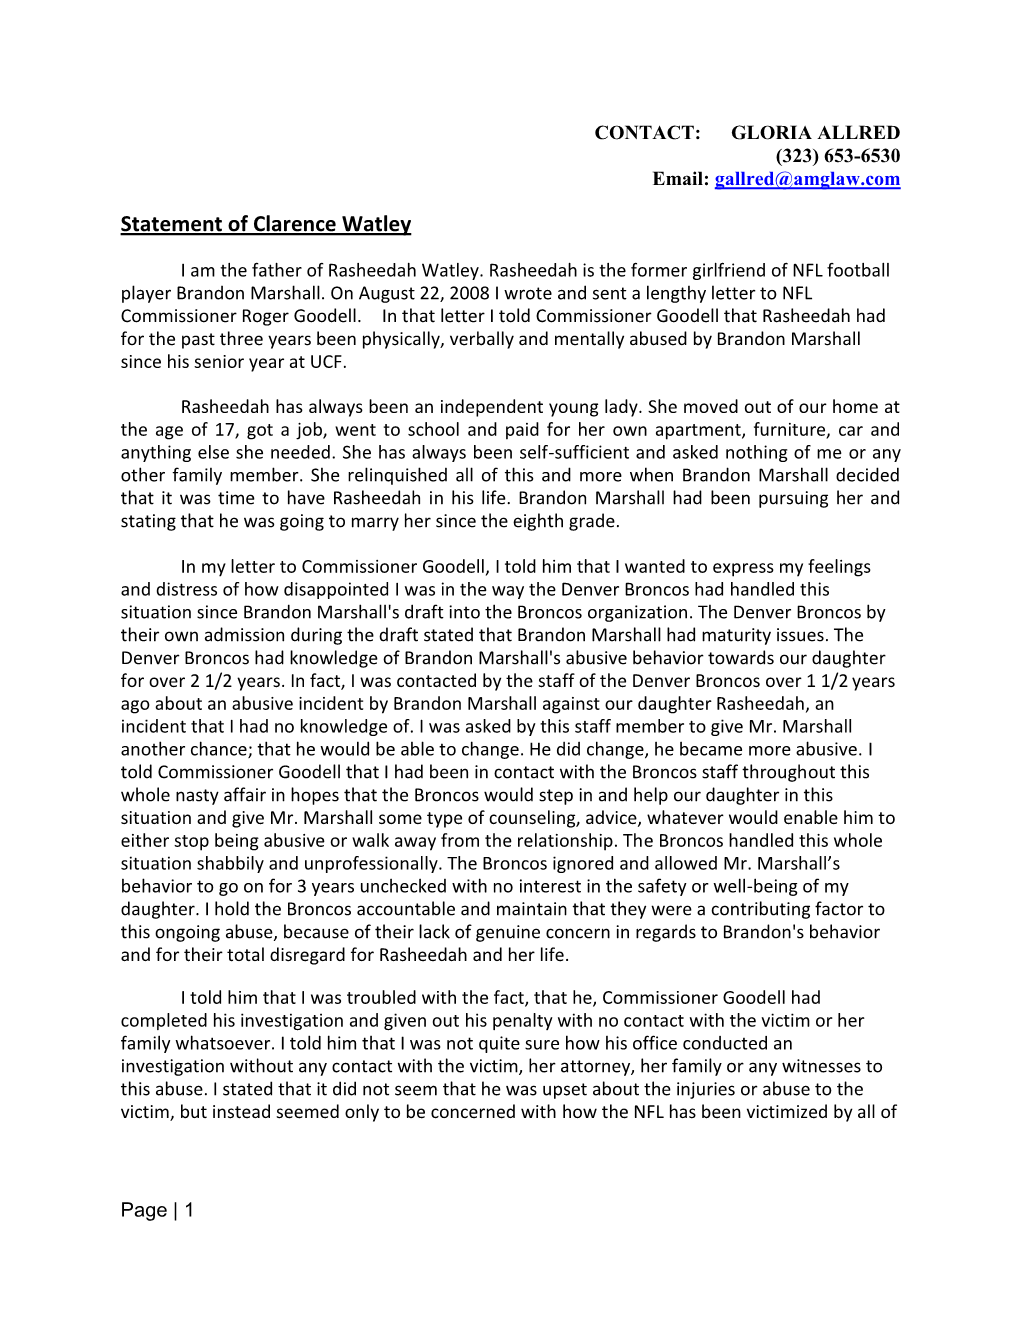 Statement of Clarence Watley